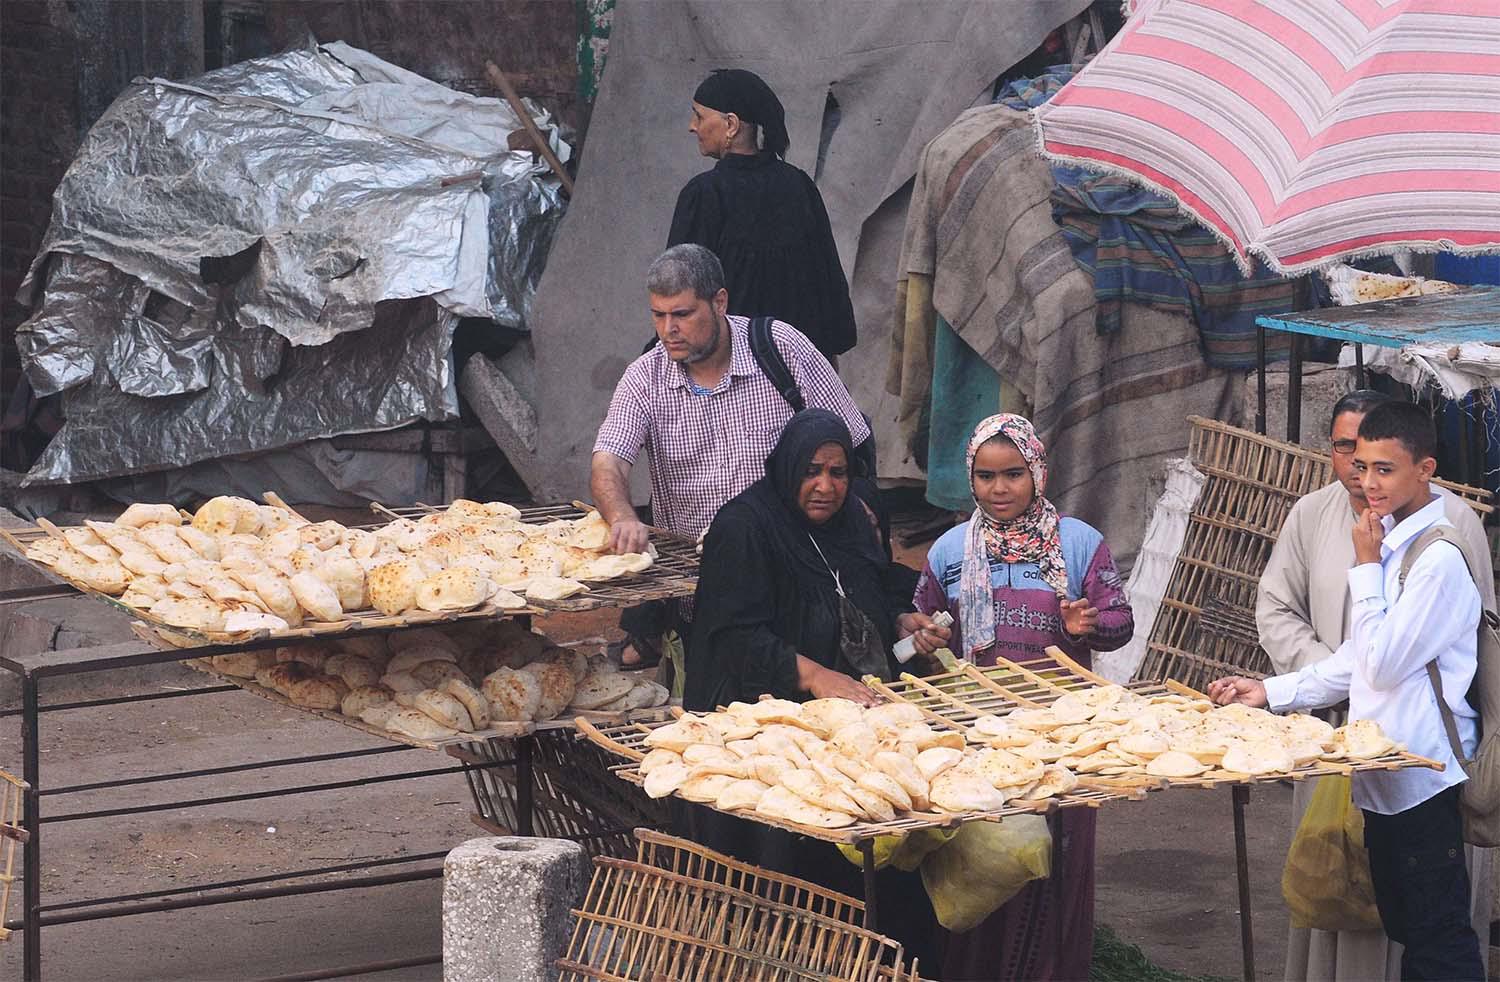 Egypt offers bread to more than 60 million people